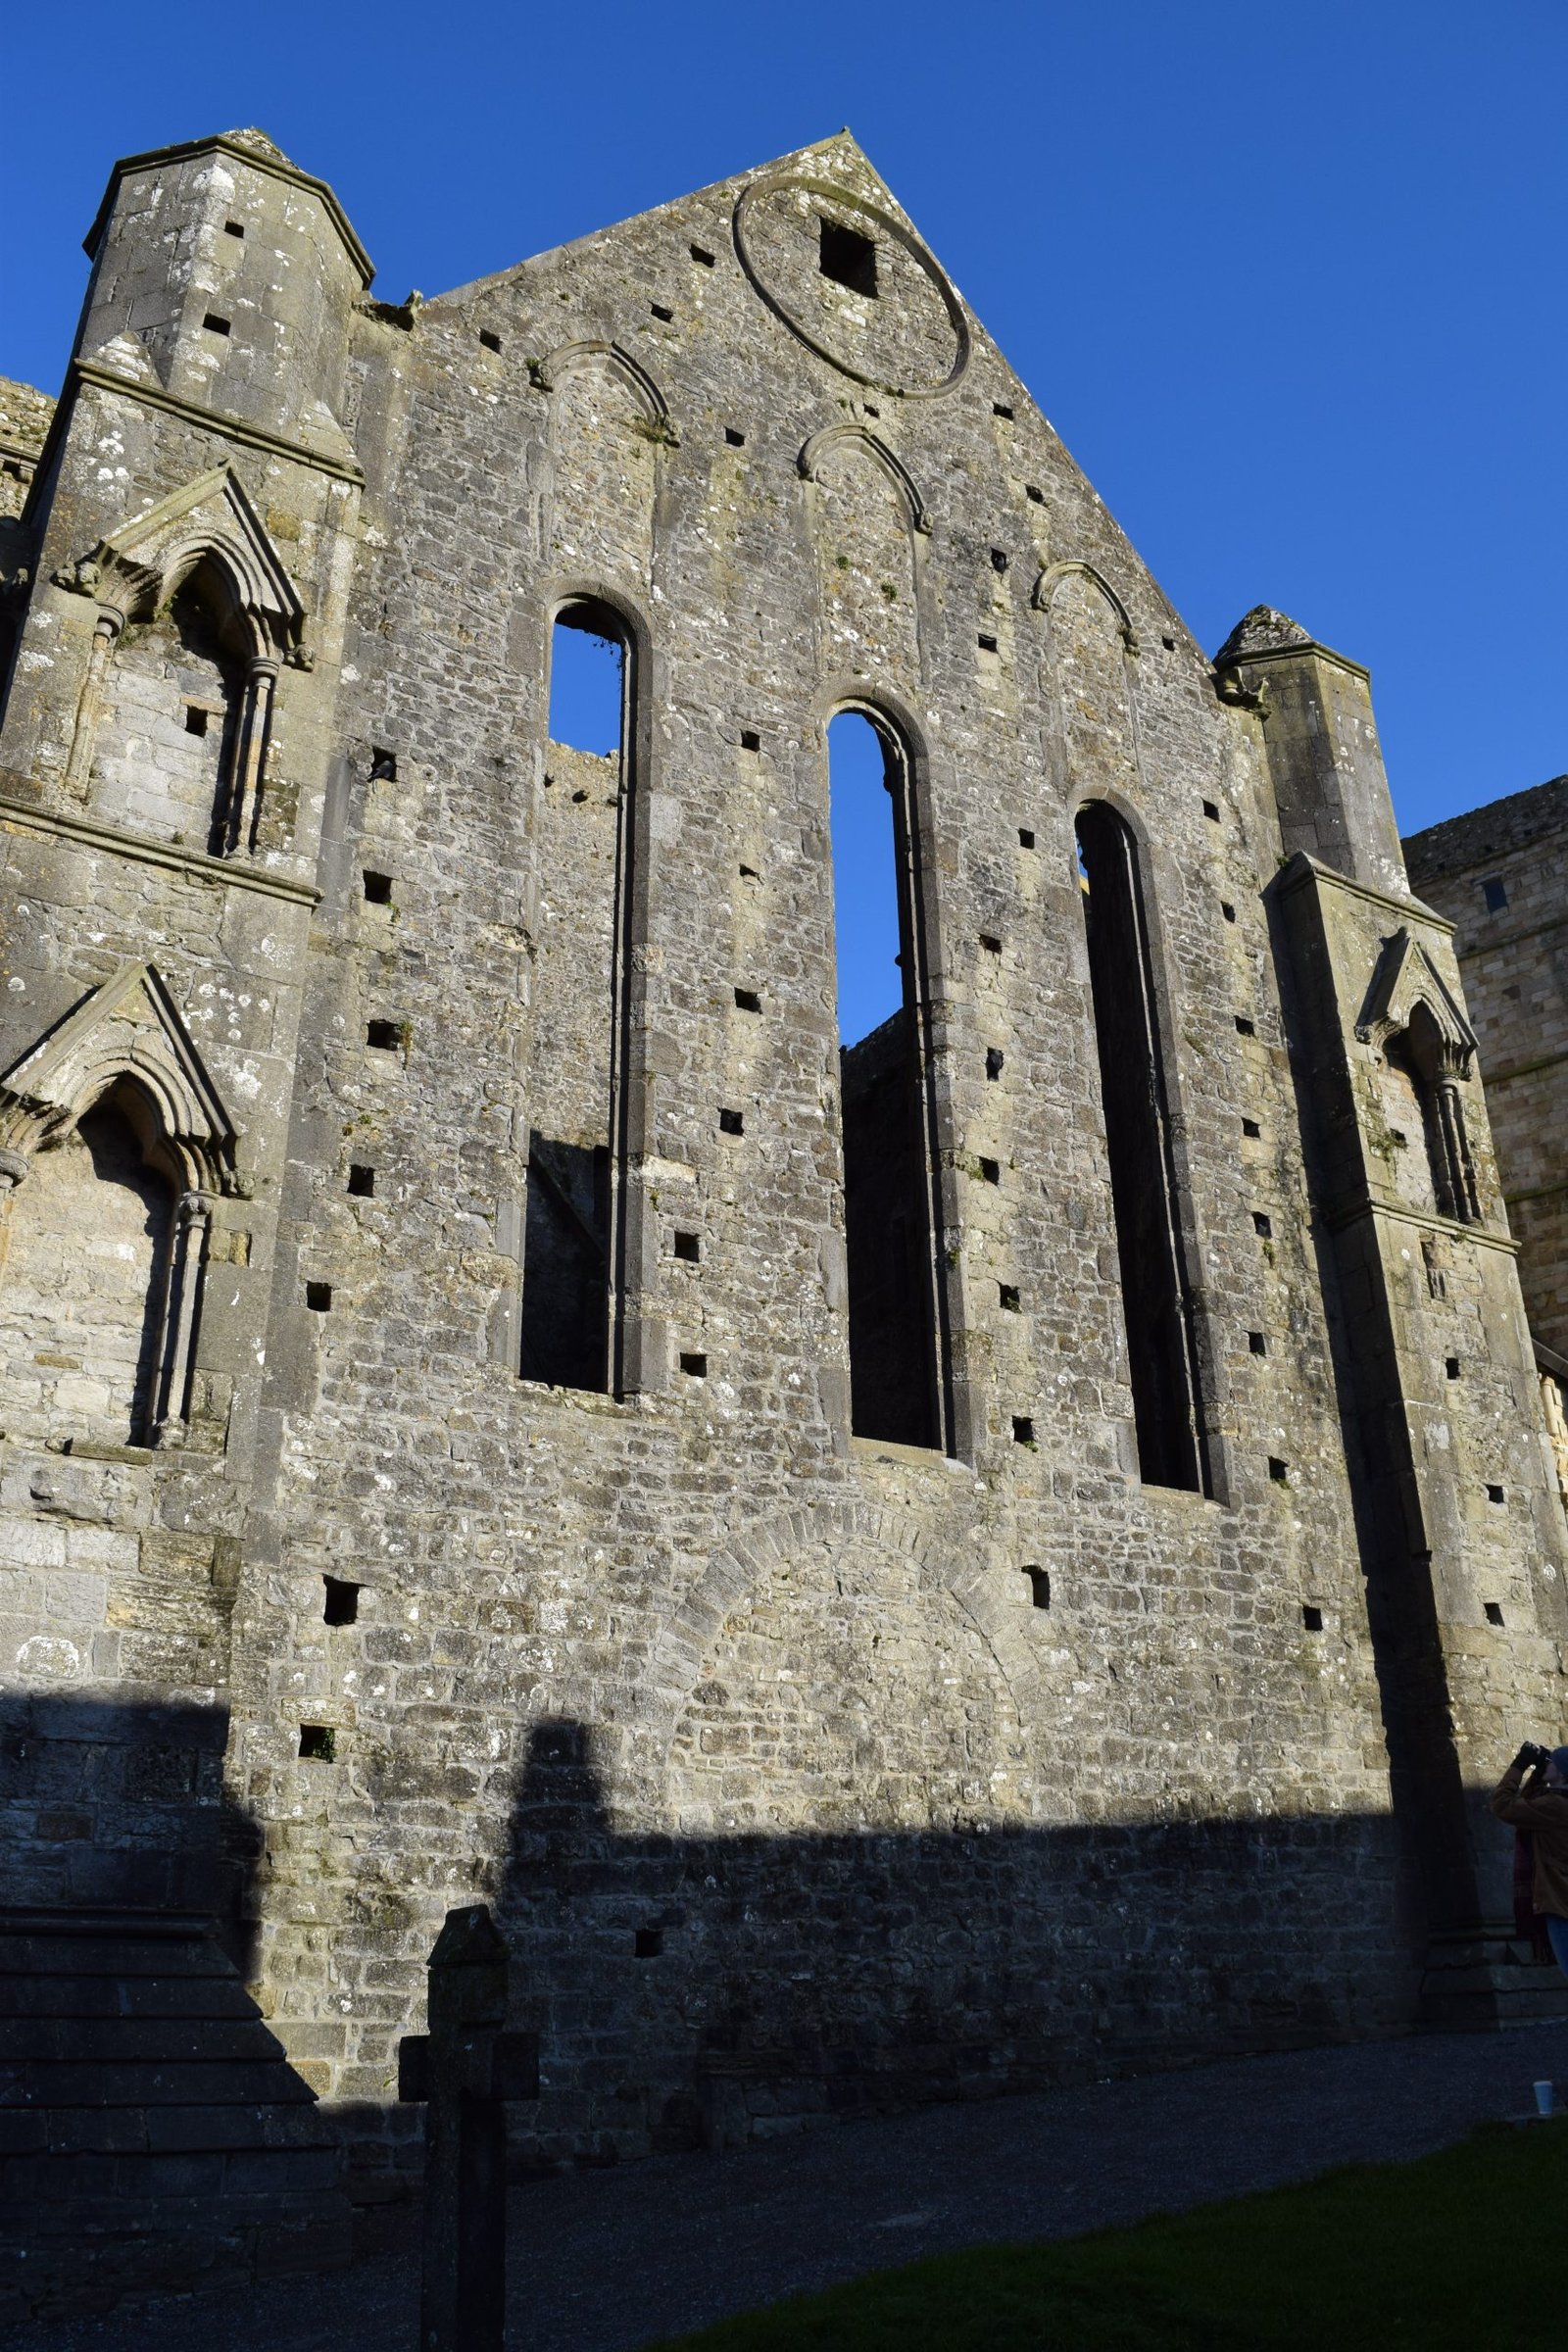 The Rock of Cashel in Ireland is historic and a must see, https://ouritalianjourney.com/rock-of-cashel-castle-ireland